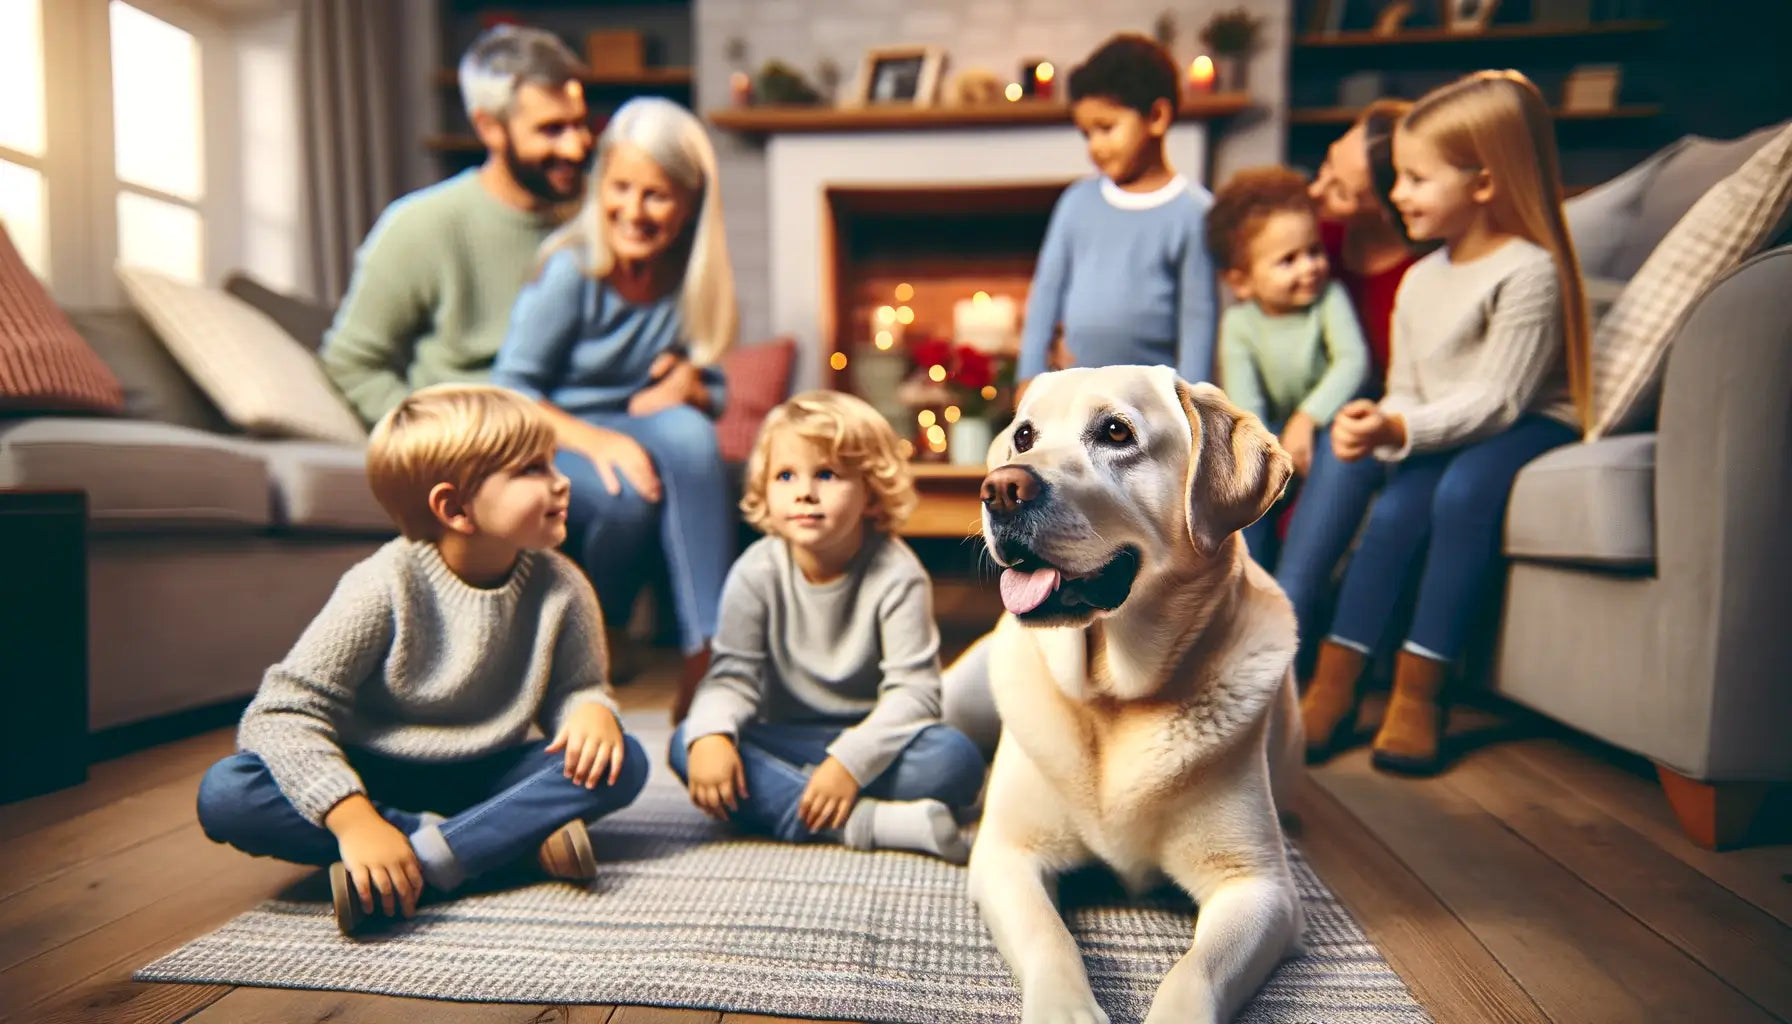 A Silver Lab in a family setting, surrounded by children and adults in a cozy home environment.